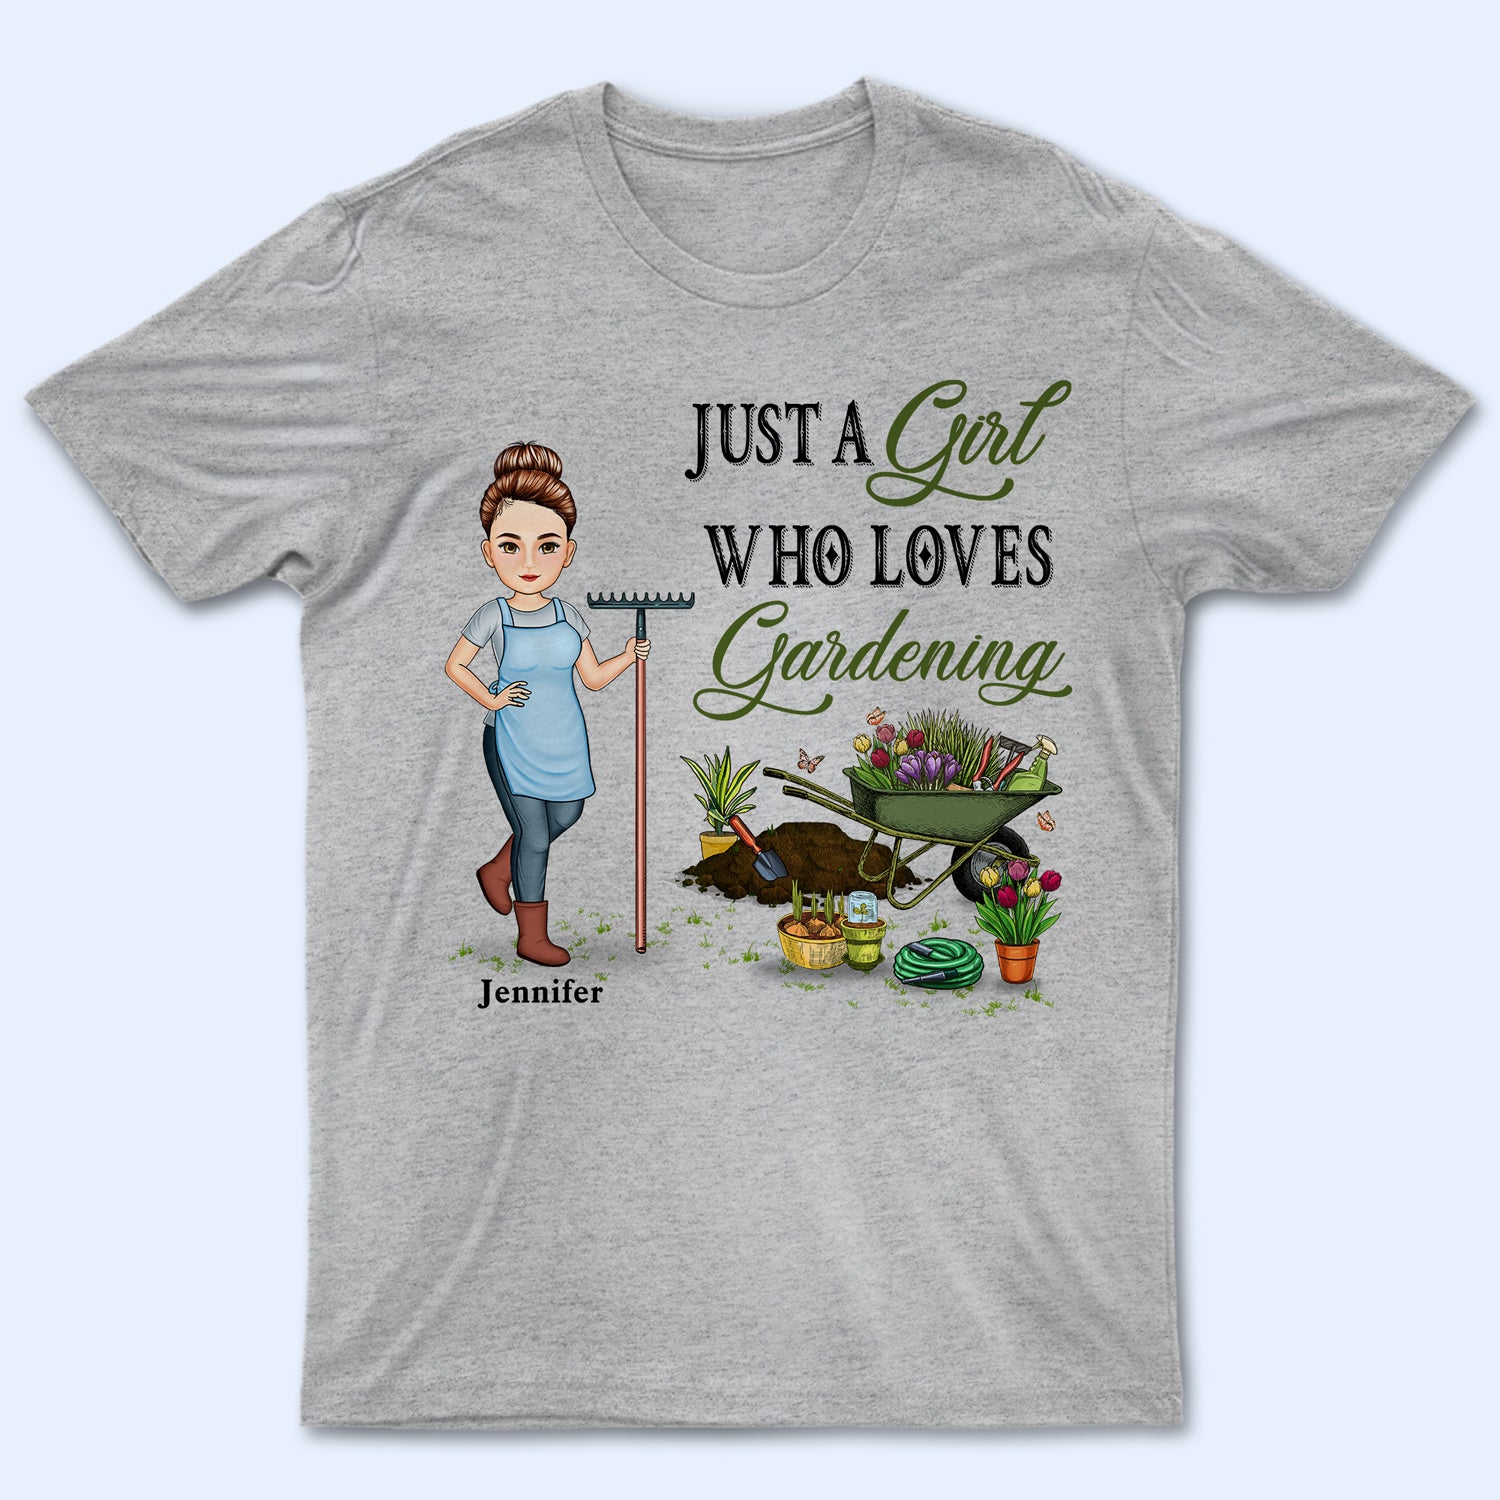 Just A Girl Boy Who Loves Gardening - Birthday, Loving Gift For Yourself, Women, Men, Plant Lovers - Personalized Custom T Shirt